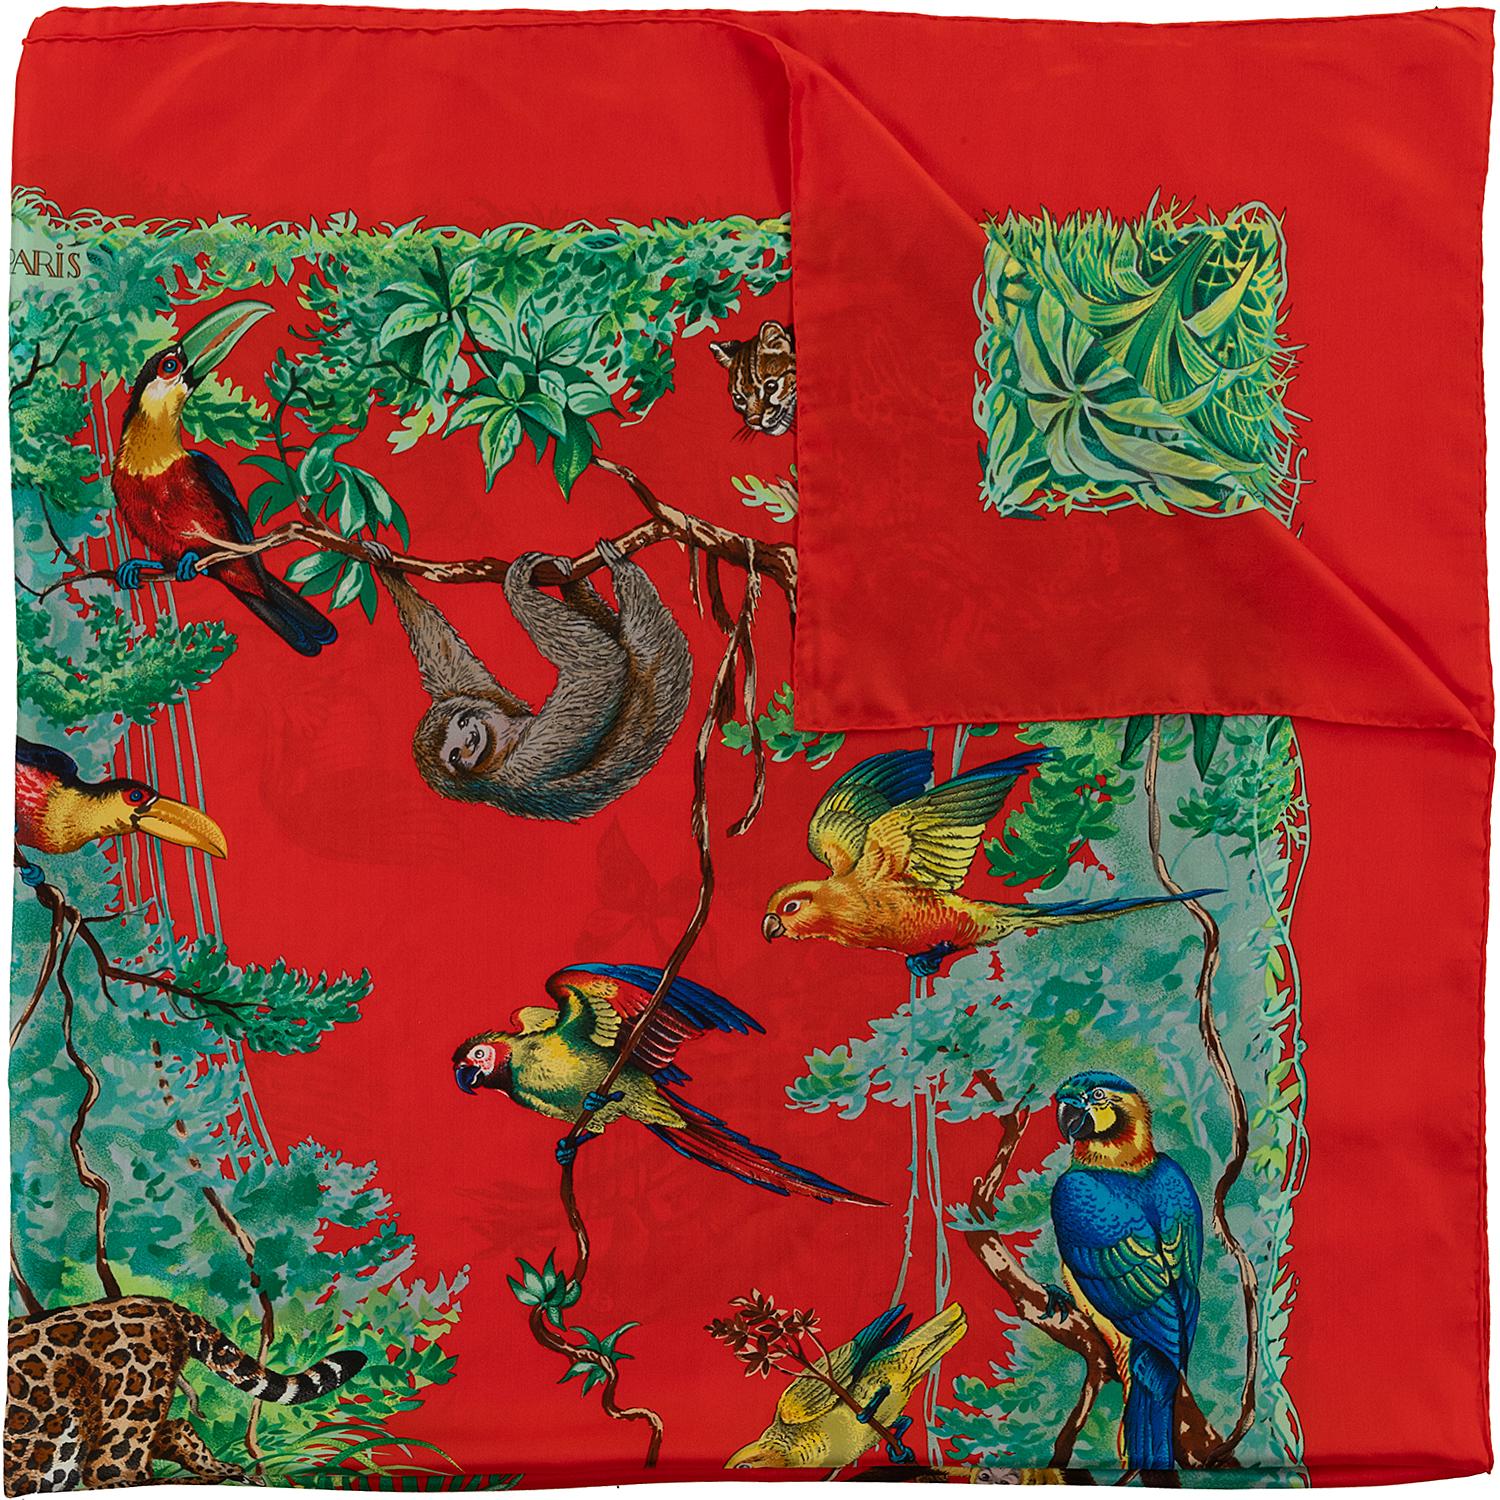 'Equateur' first designed by Robert Dallet in 1988, is a wonderfully evocative Hermes Silk Shawl with vibrant colours on a red ground, depicting animal-life at the equator. The 140cm (55in. x 55in.) Shawl comes with it's original Hermes sales Tag